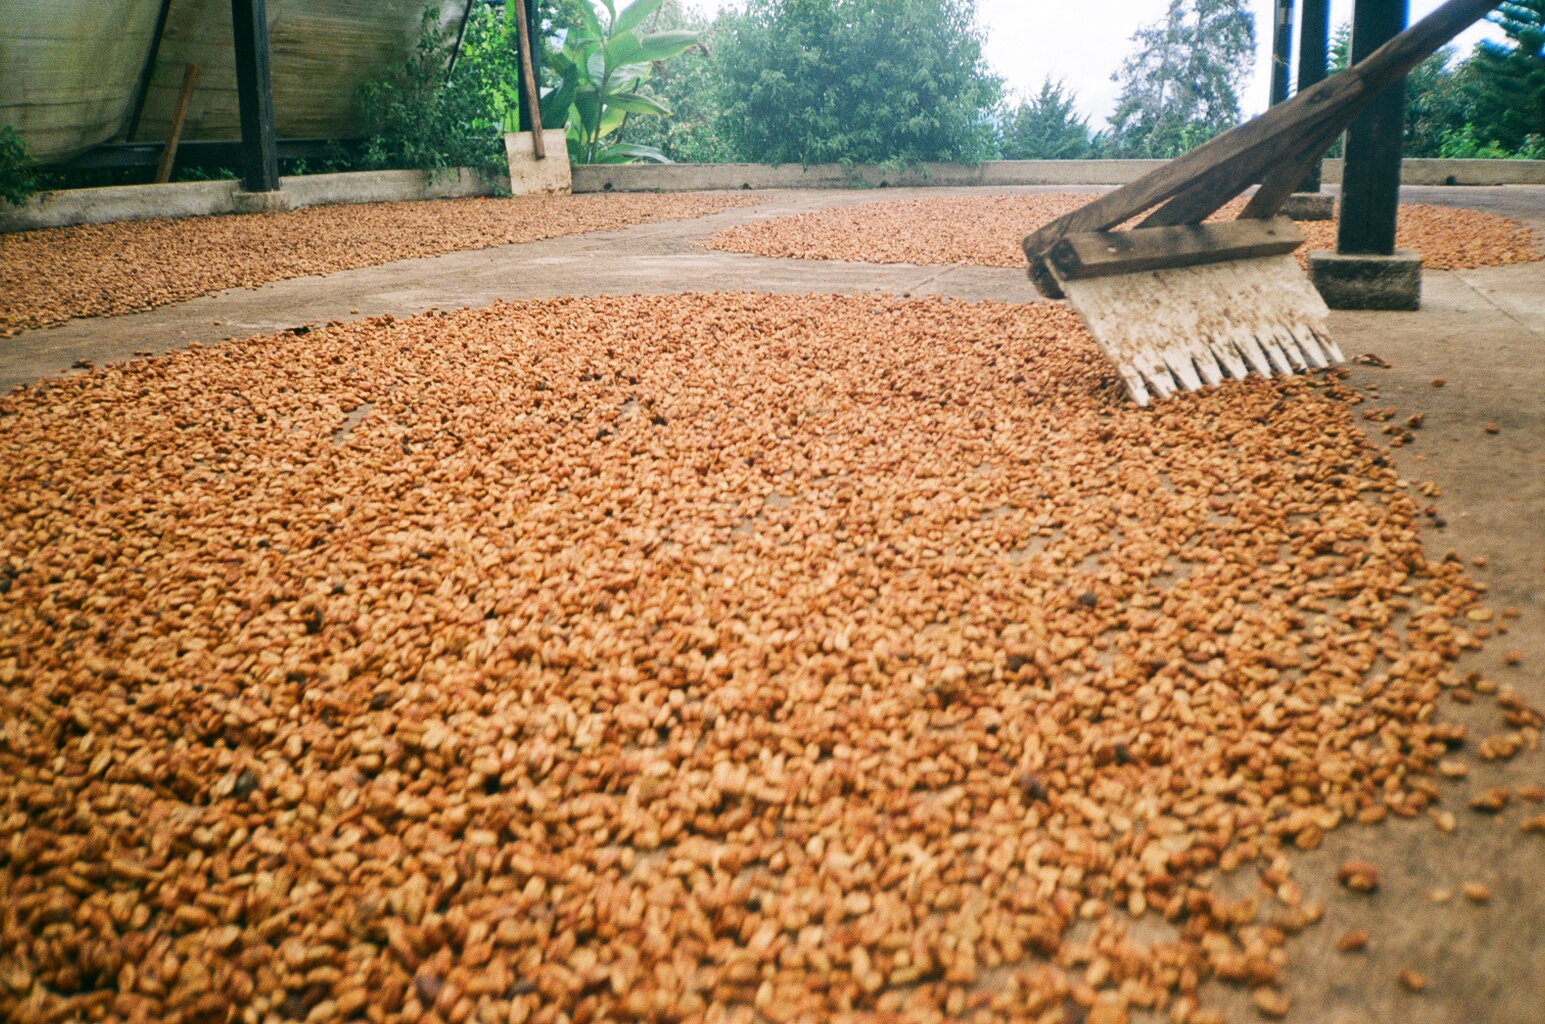 Coffee being raked on a cement patio